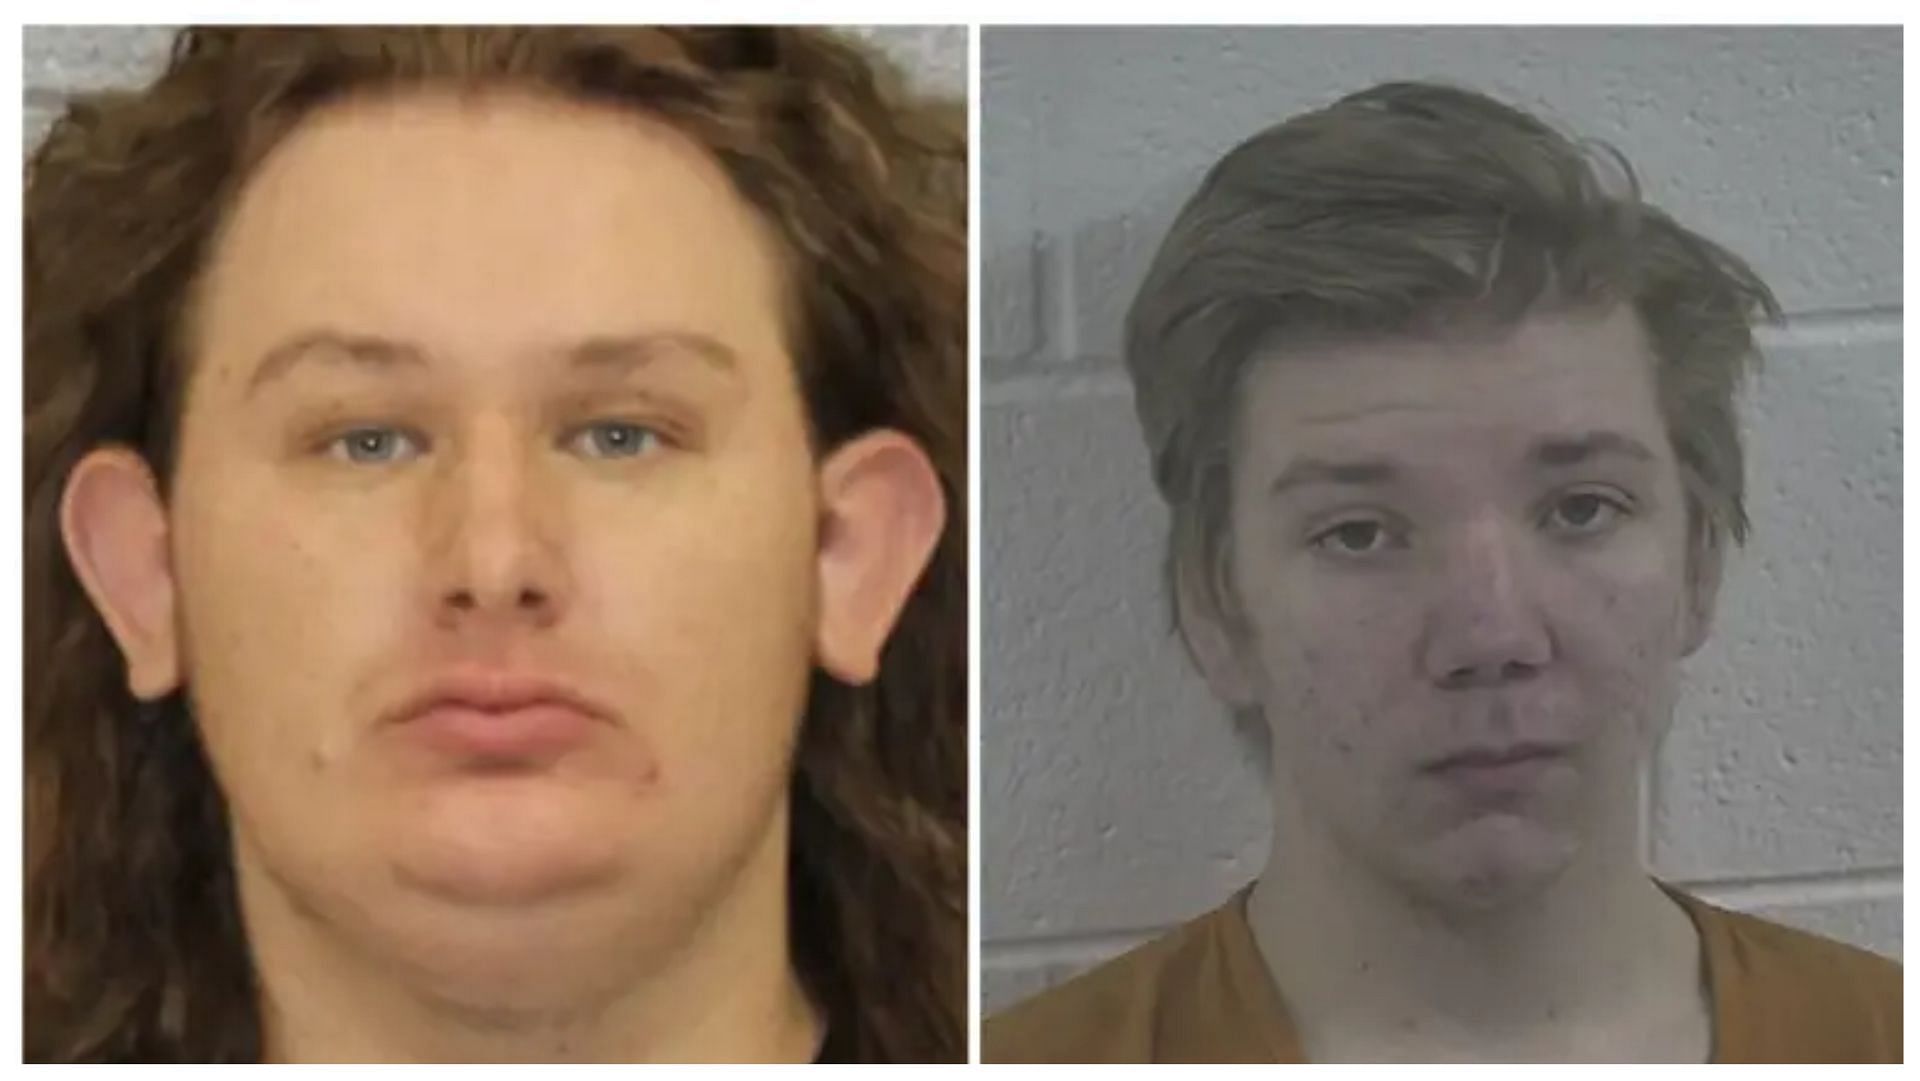 Kya Christian Nelson (right) and James Thomas Andrew McCarty (left) charged with squatting, (Image via El_Grillo/Twitter)